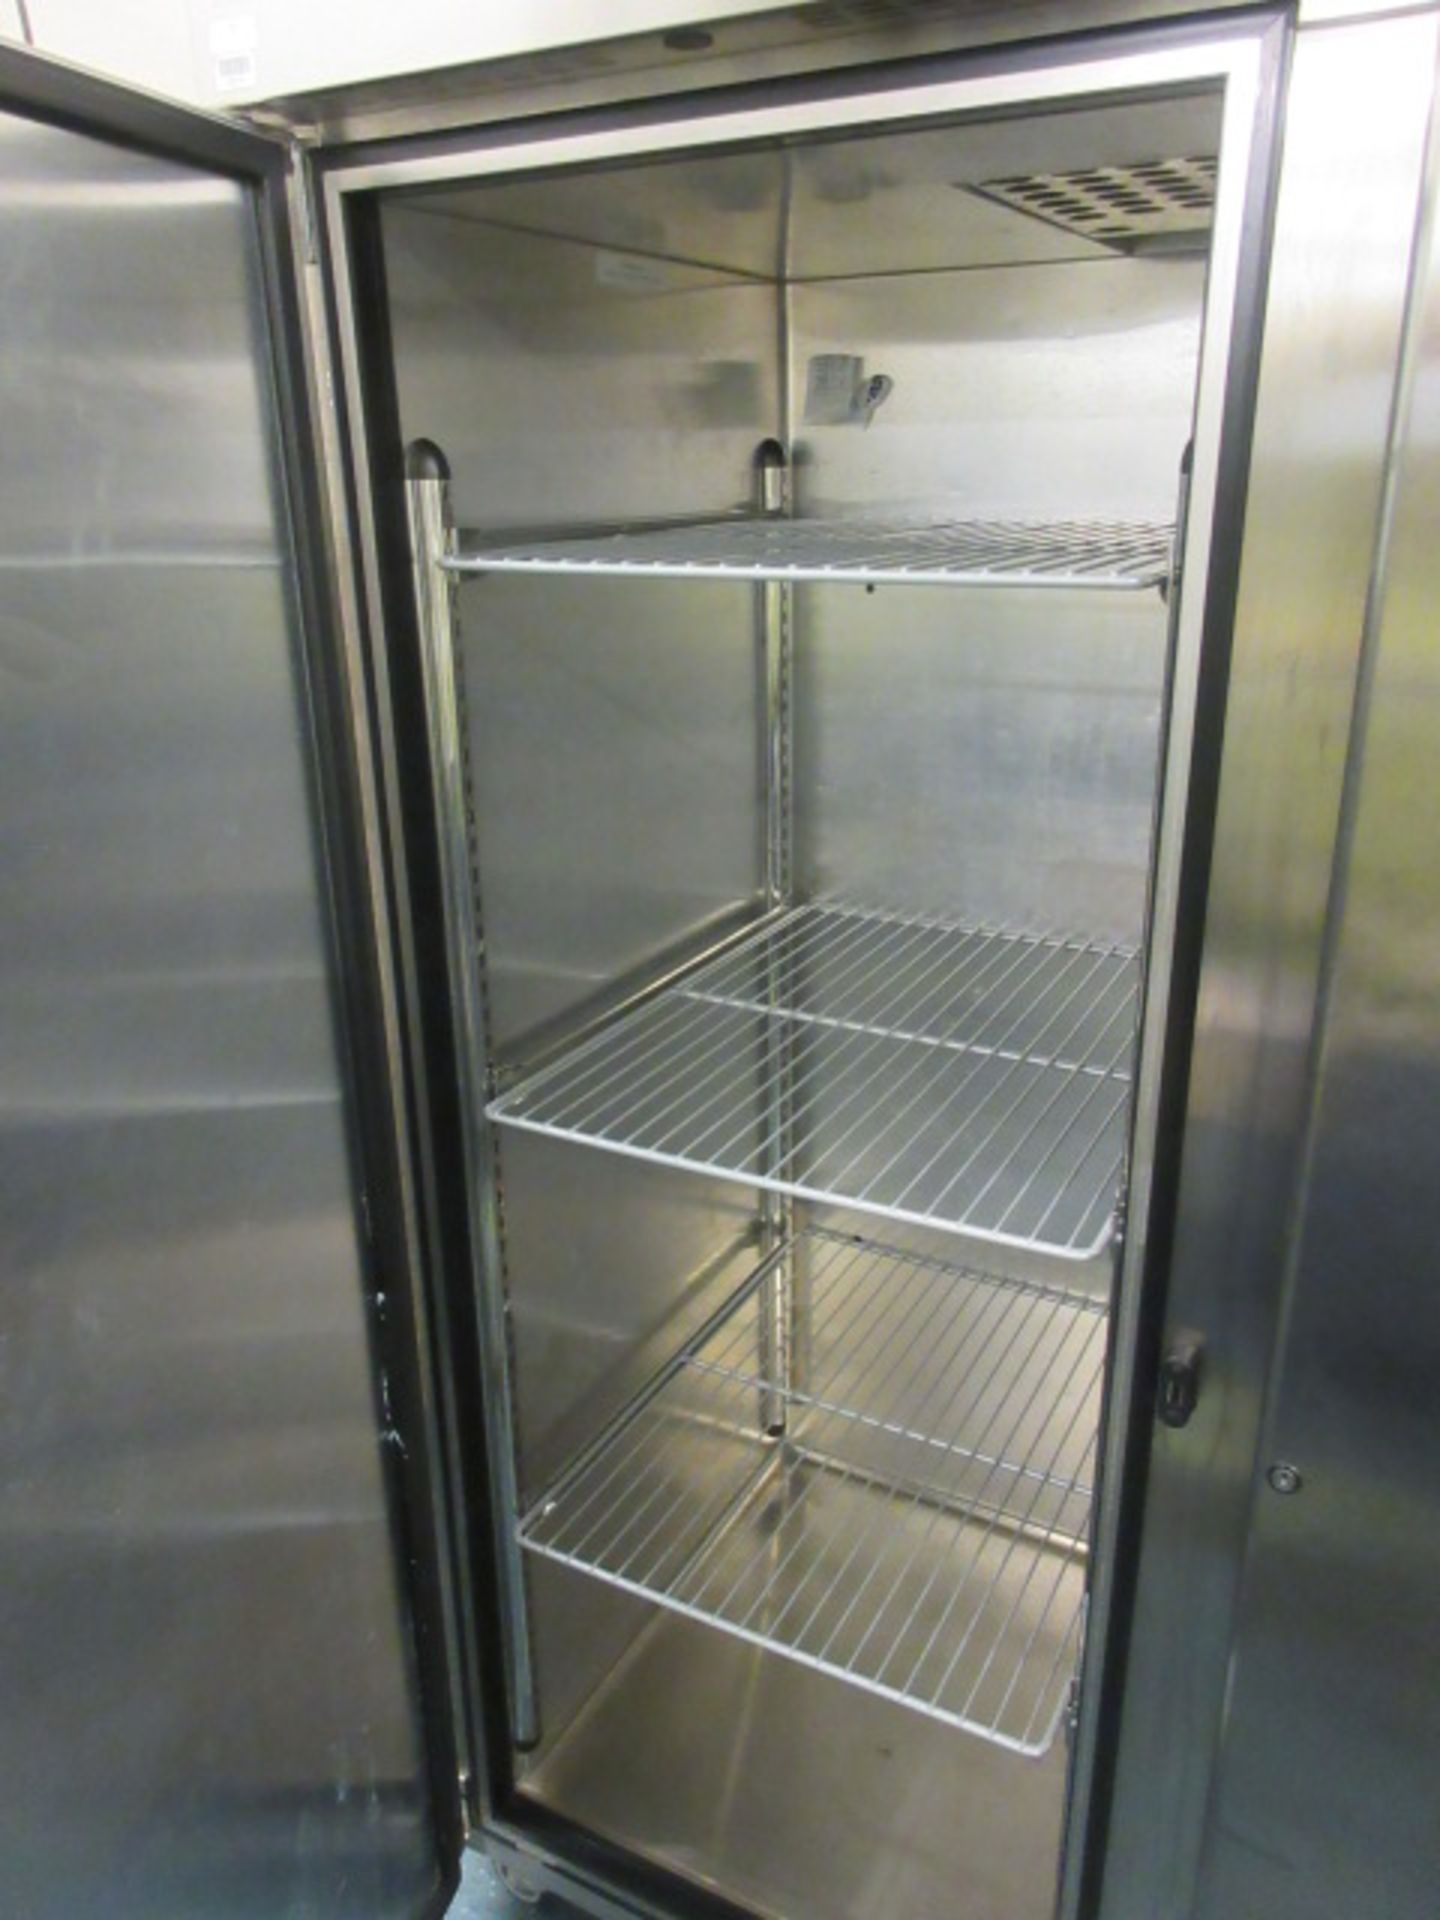 FOSTER EPROG1350L TWIN COMPARTMENT FREEZER, -18/-21 DEGREE CELSIUS, REFRIGERANT 404A. SN E5219319 - Image 2 of 4